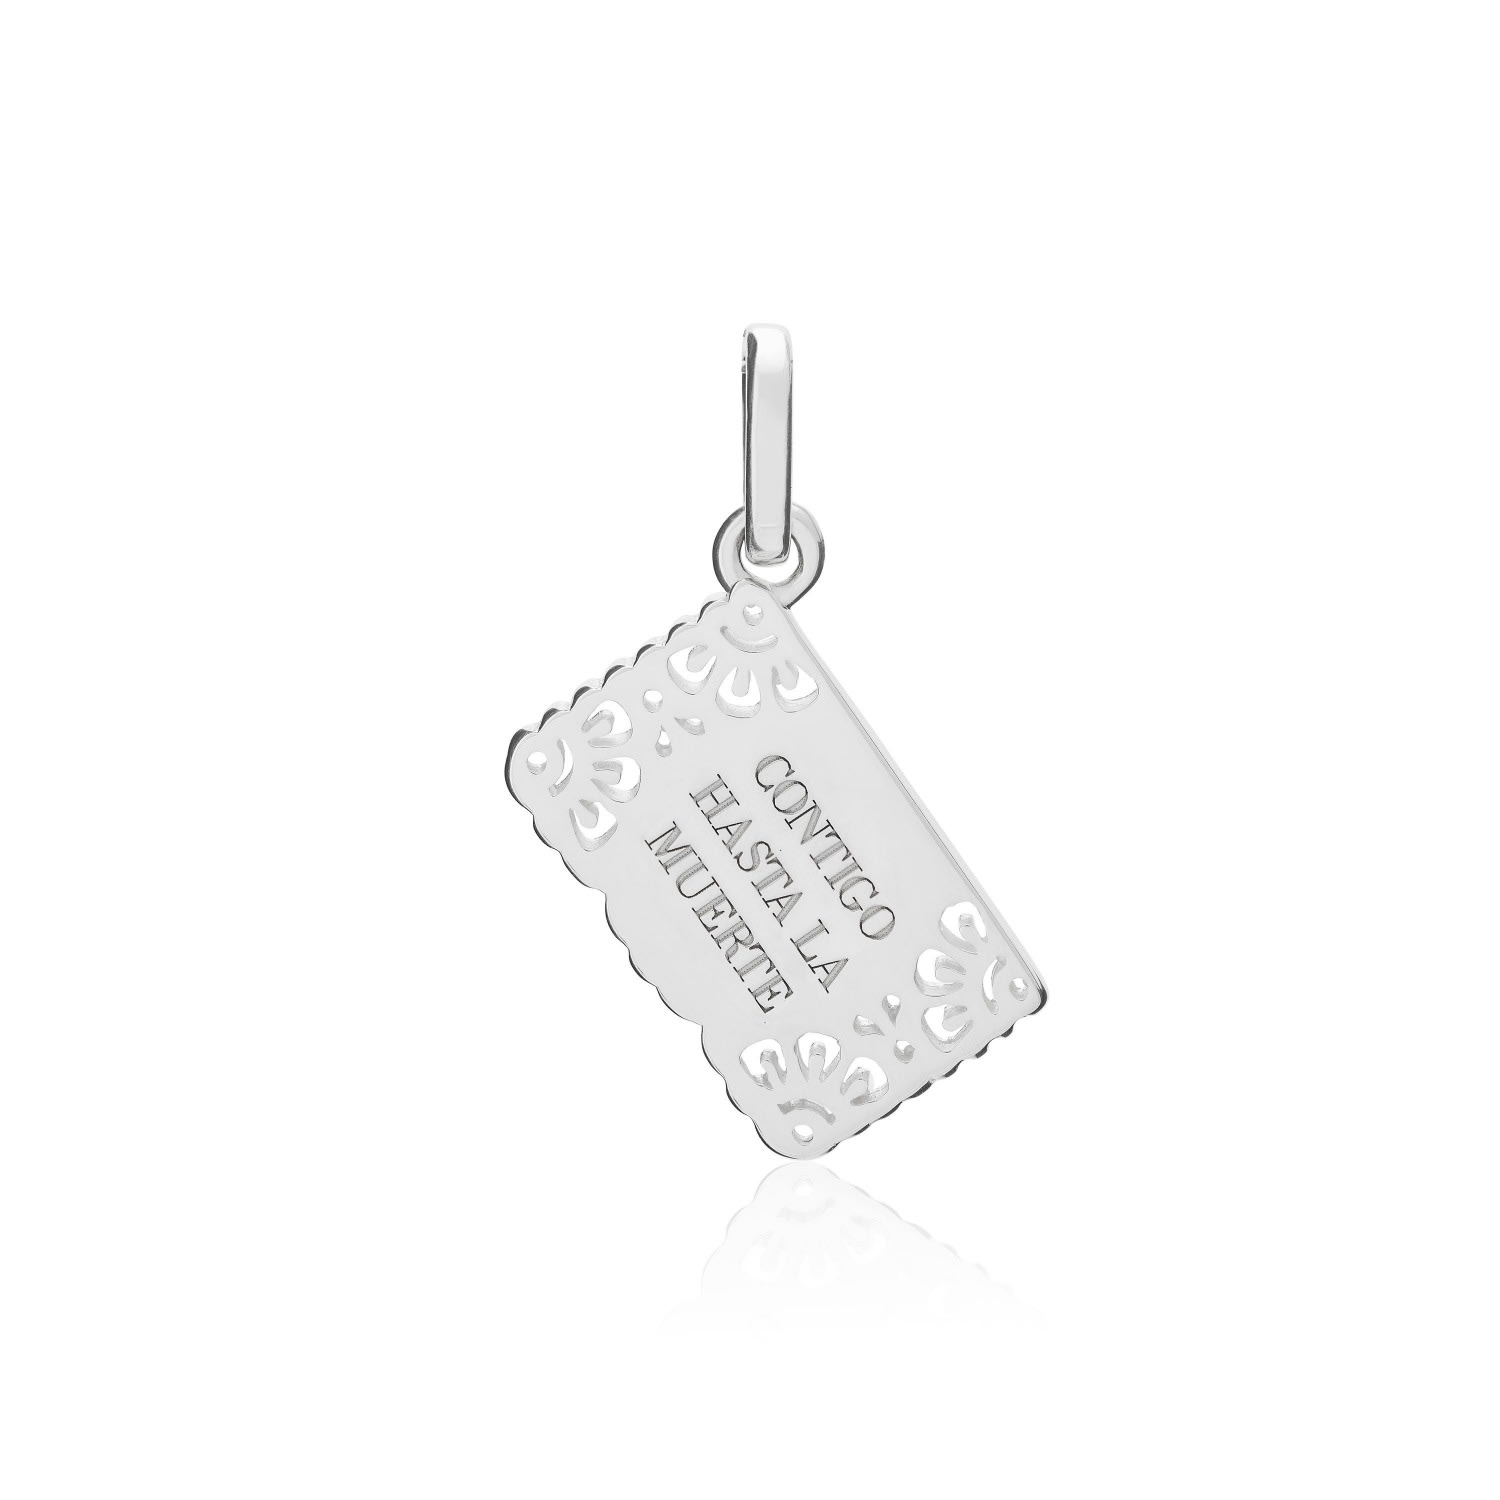 Women’s Exquisitely Detailed ’Till Death Do Us Part’ Charm Handmade In Sterling Silver Tane Mexico 1942